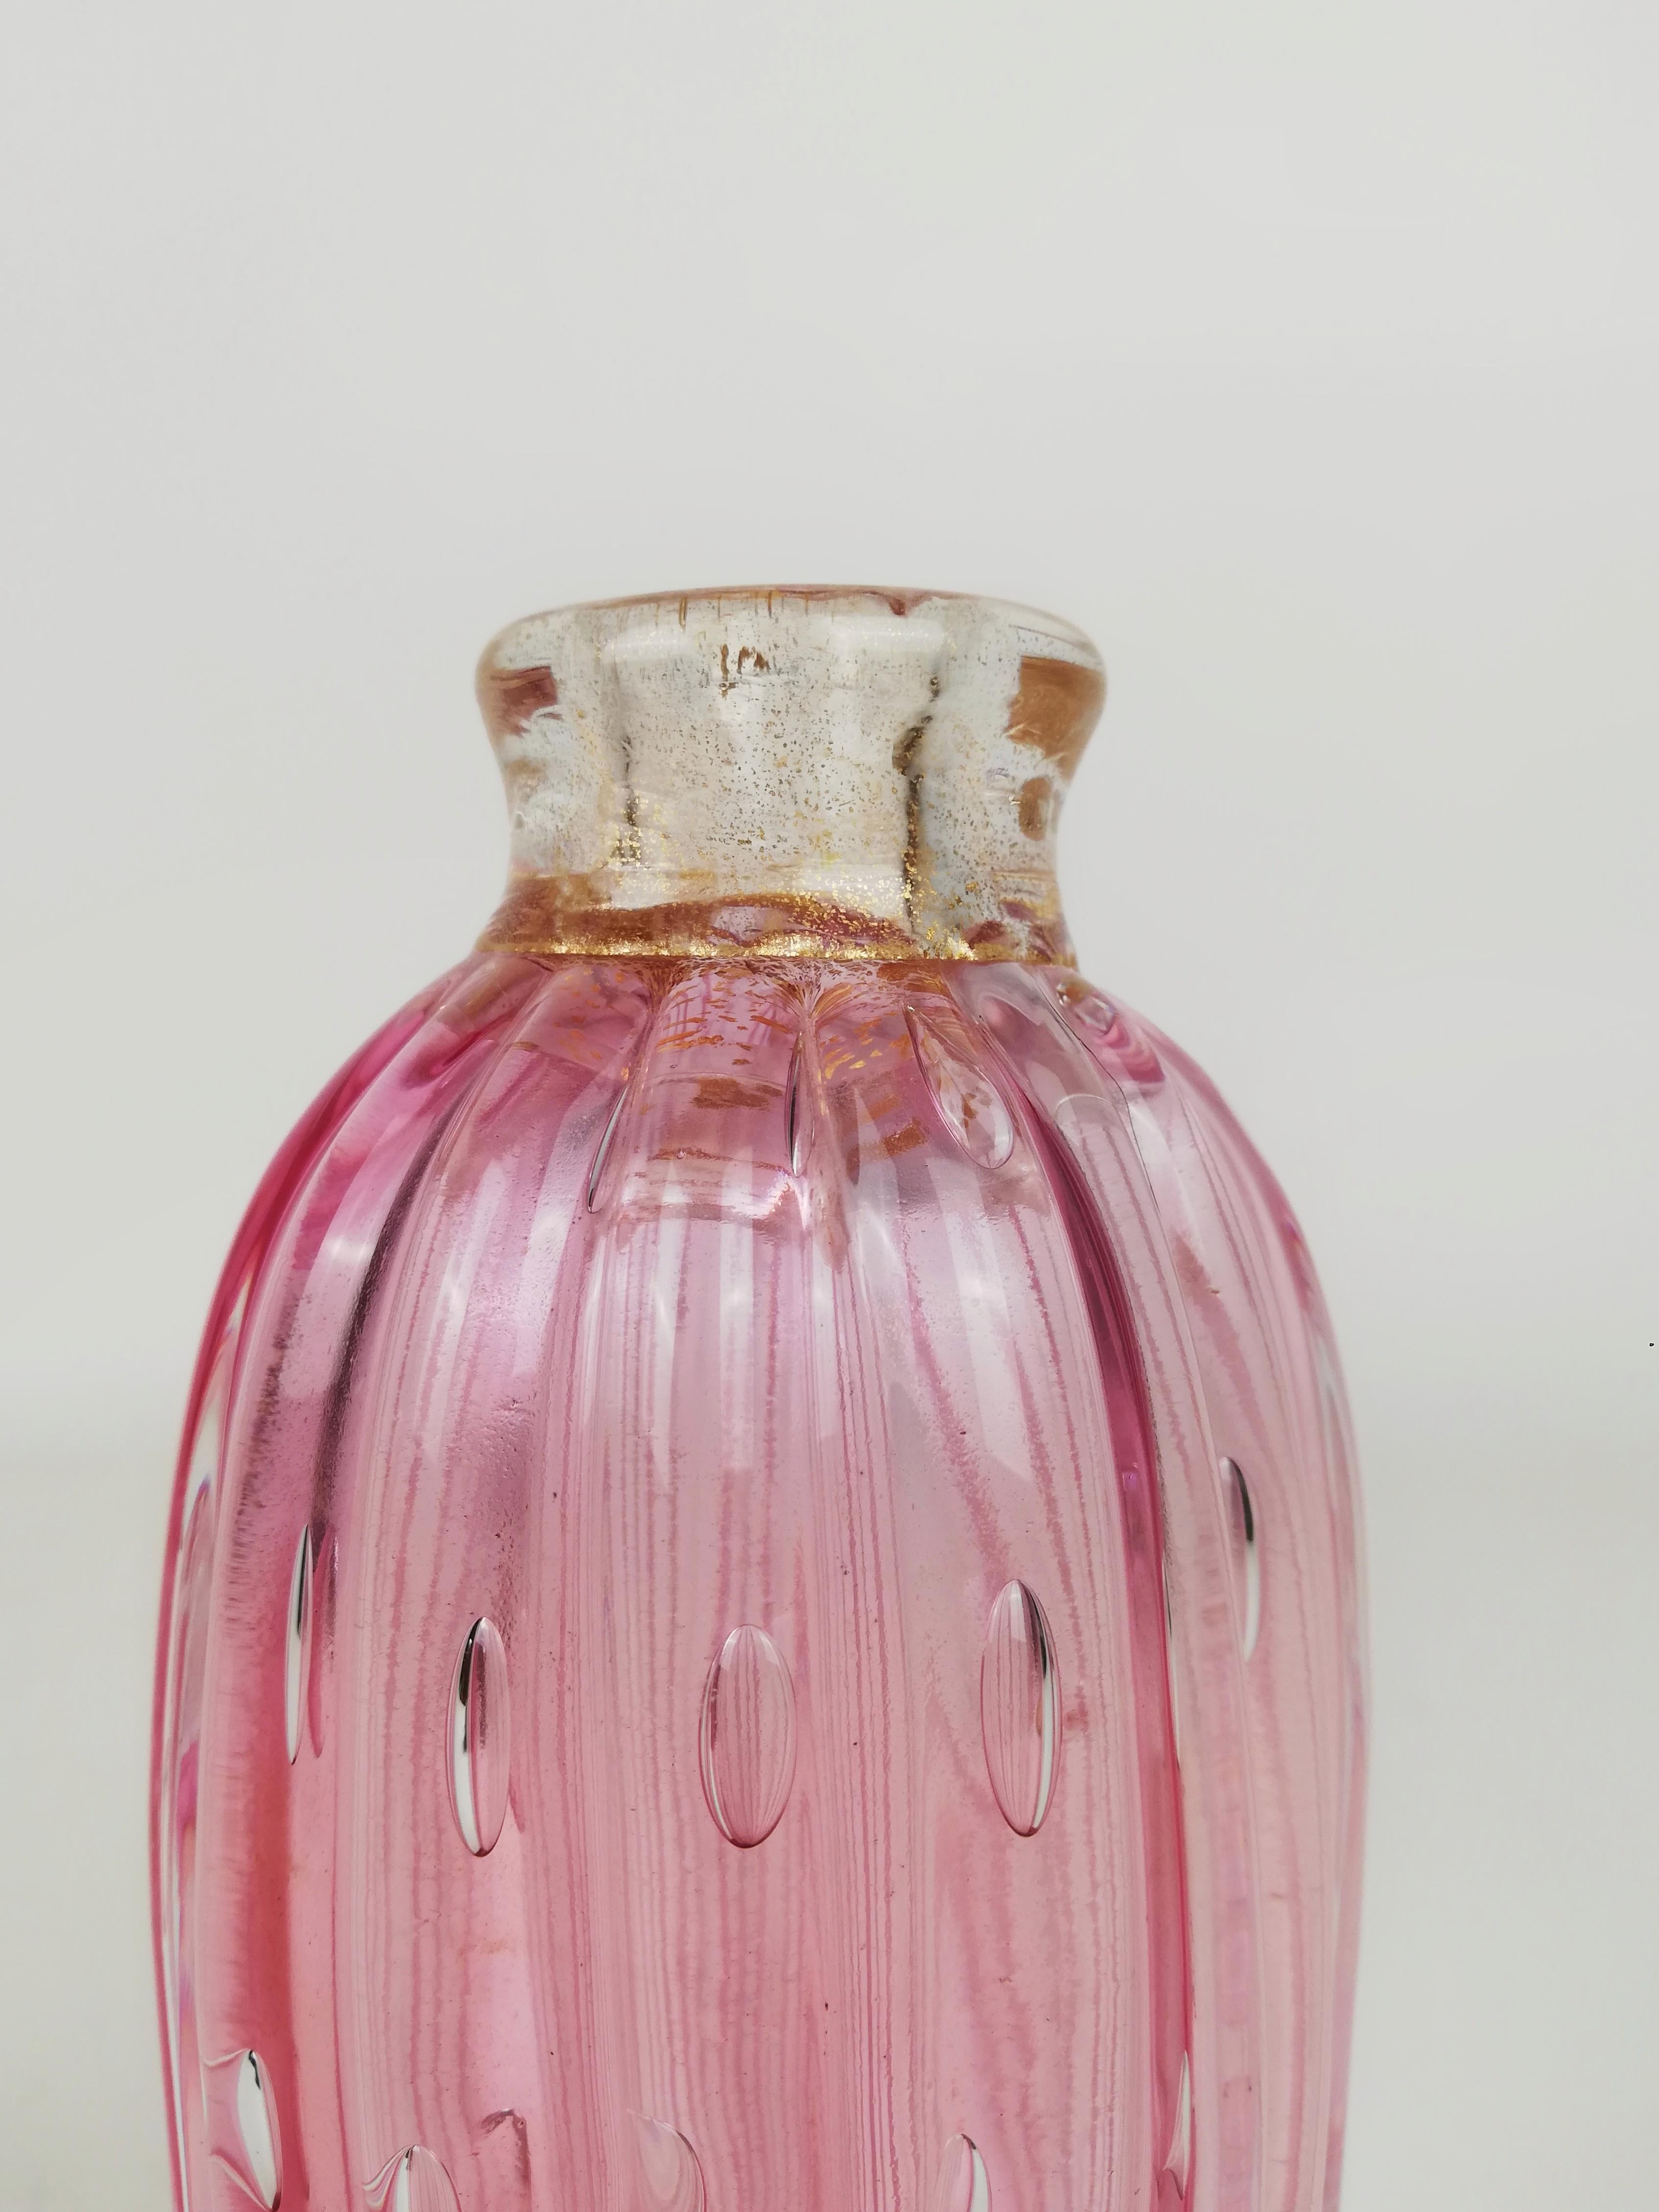 Art Deco Vase in Pink and Gold Murano Bubble Glass, Italy 1930s For Sale 1